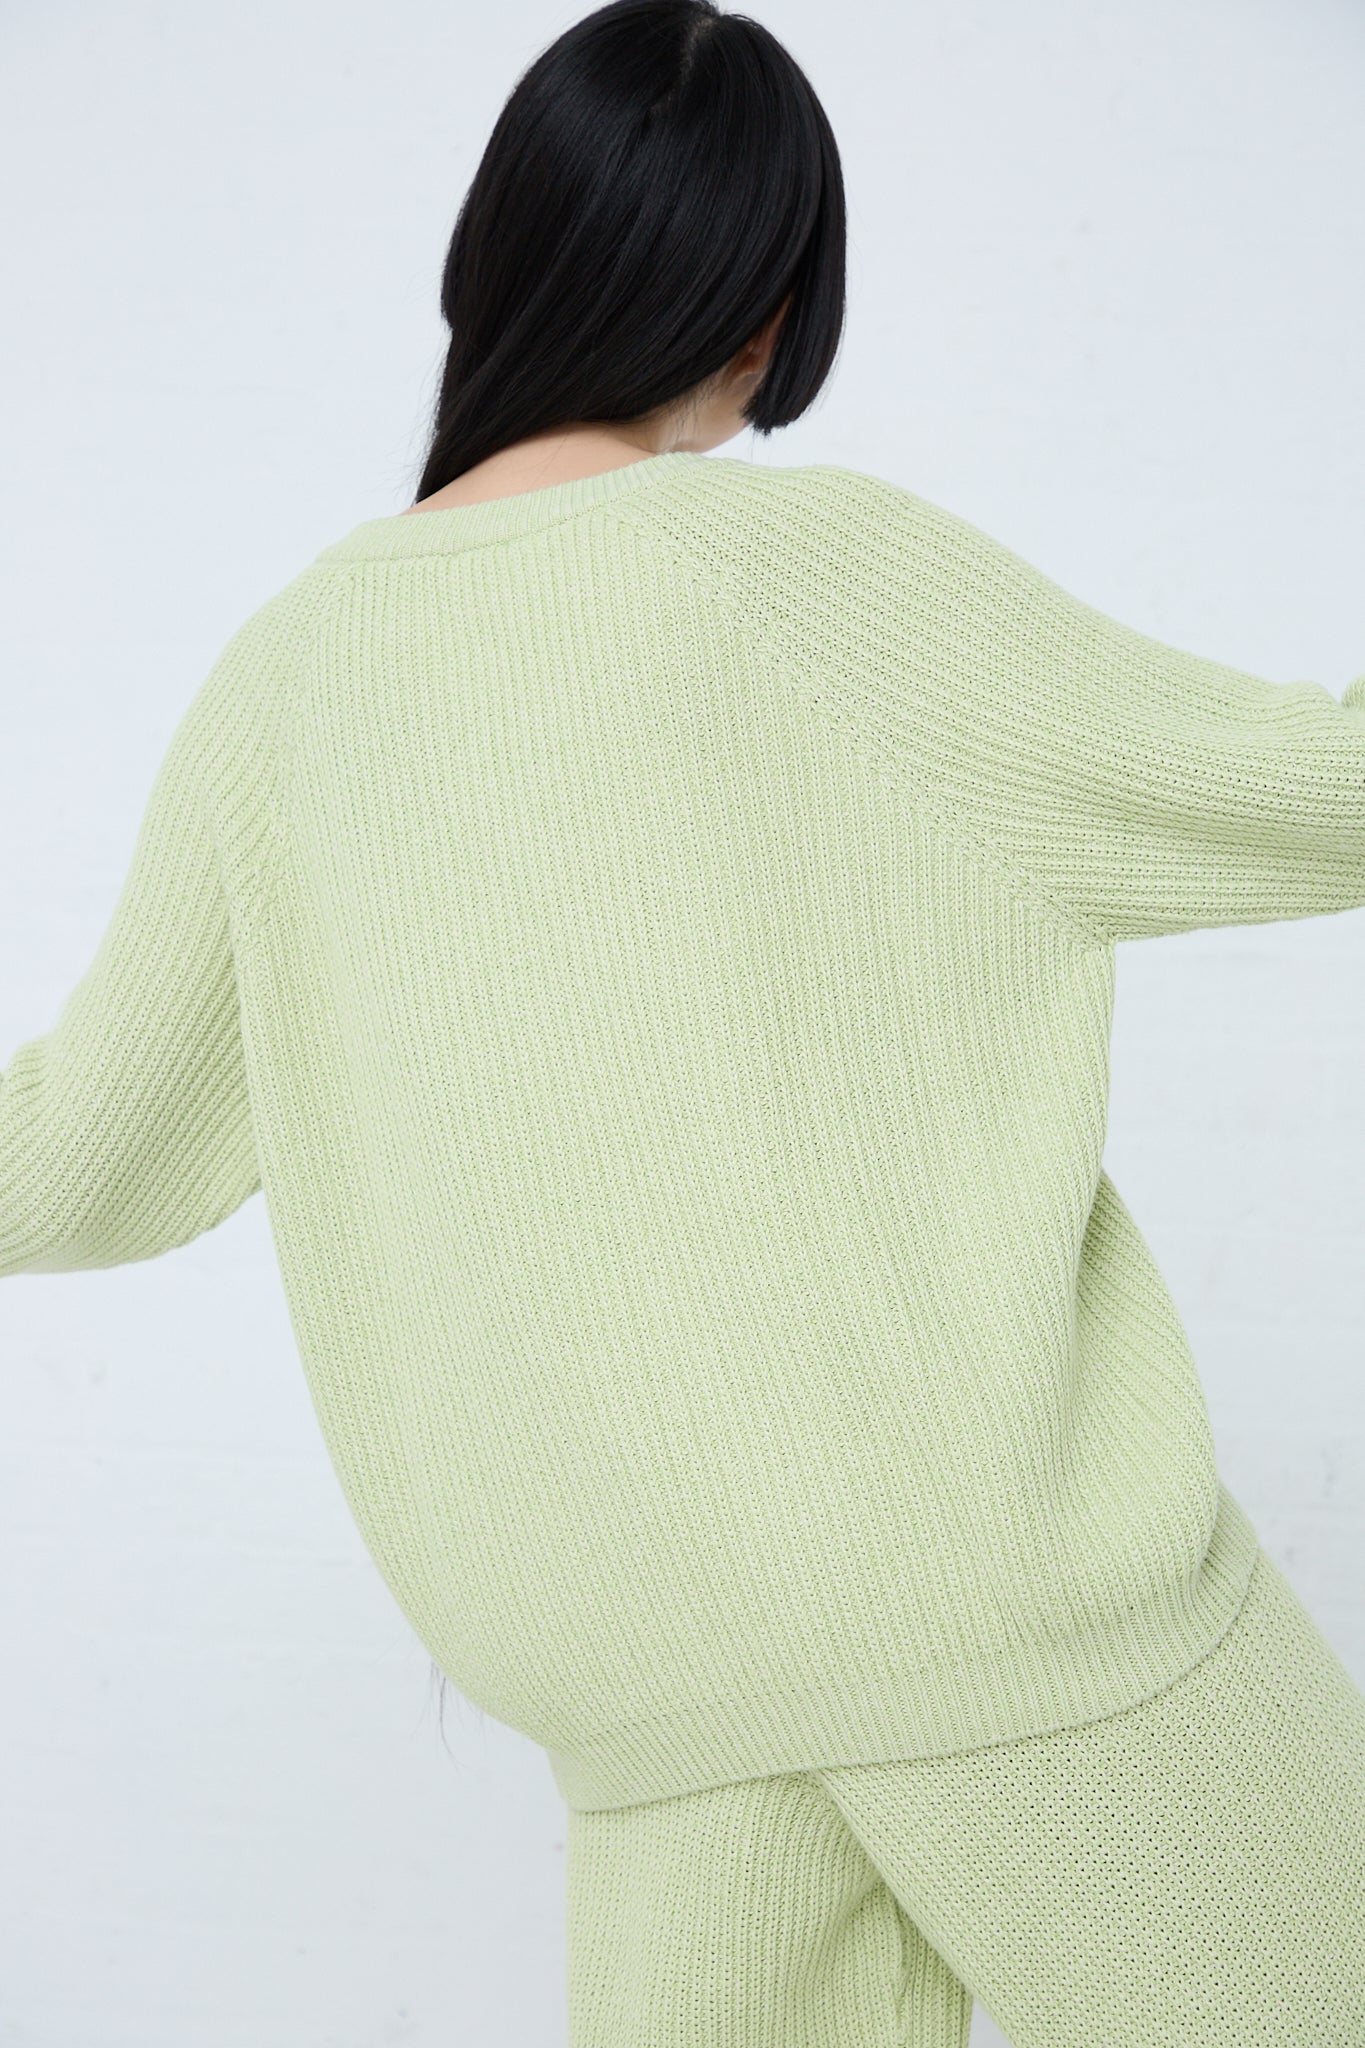 The back of a woman wearing a Baserange Cotton Dodd V Neck Pullover in Mimosa green sweater. Up close view.